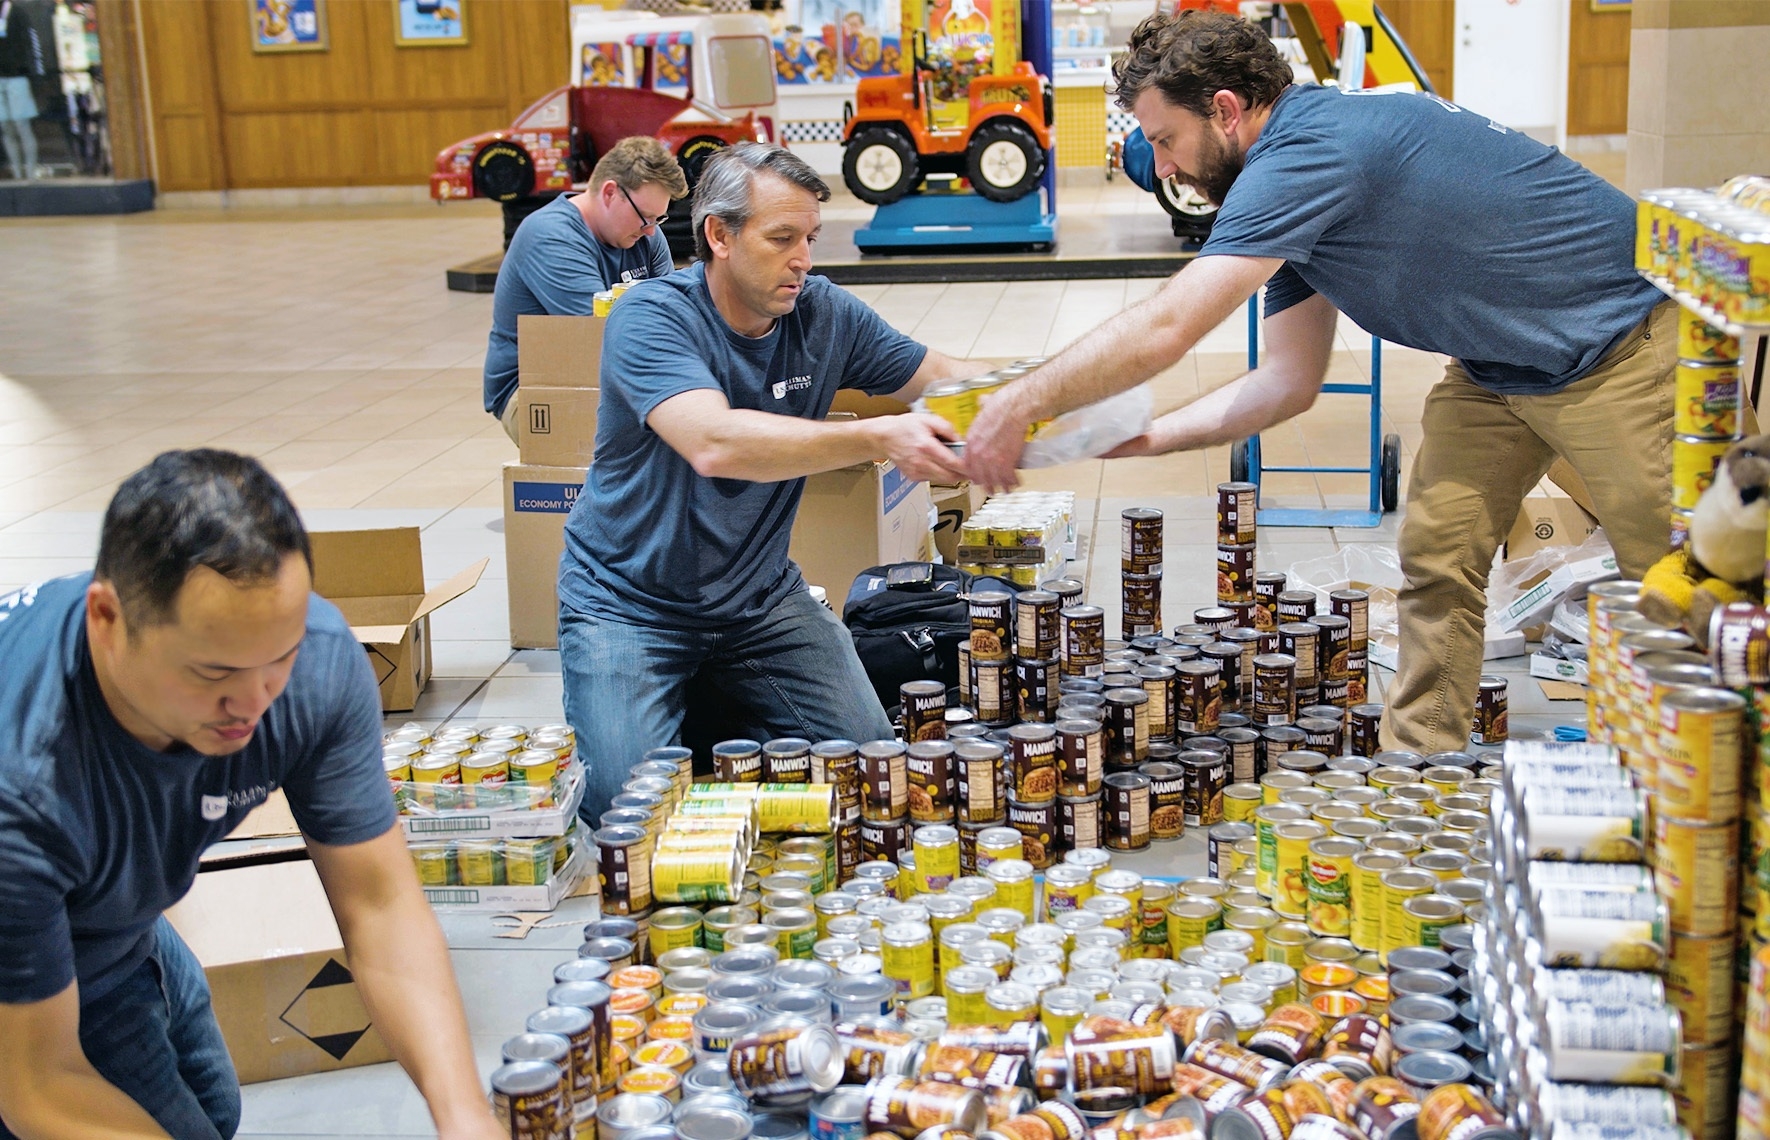 Events such as Canstruction allow our team to combine our love of engineering and giving back. Our team competes to build an impressive structure out of canned goods – after the competition, the canned goods are donated to a local food pantry.